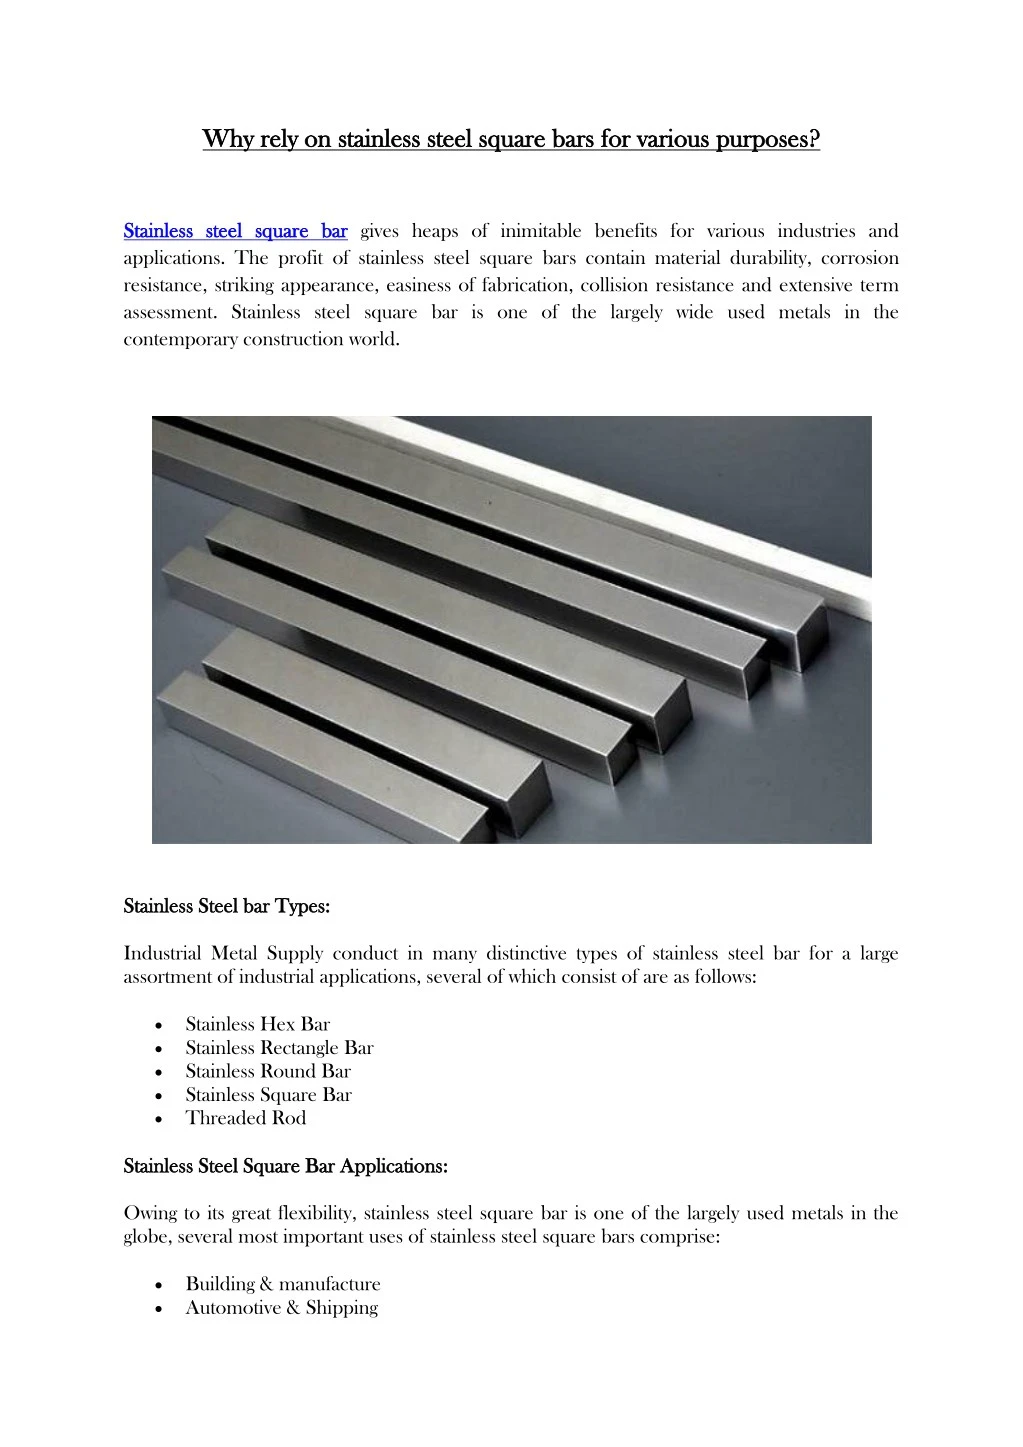 why rely on why rely on stainless steel square